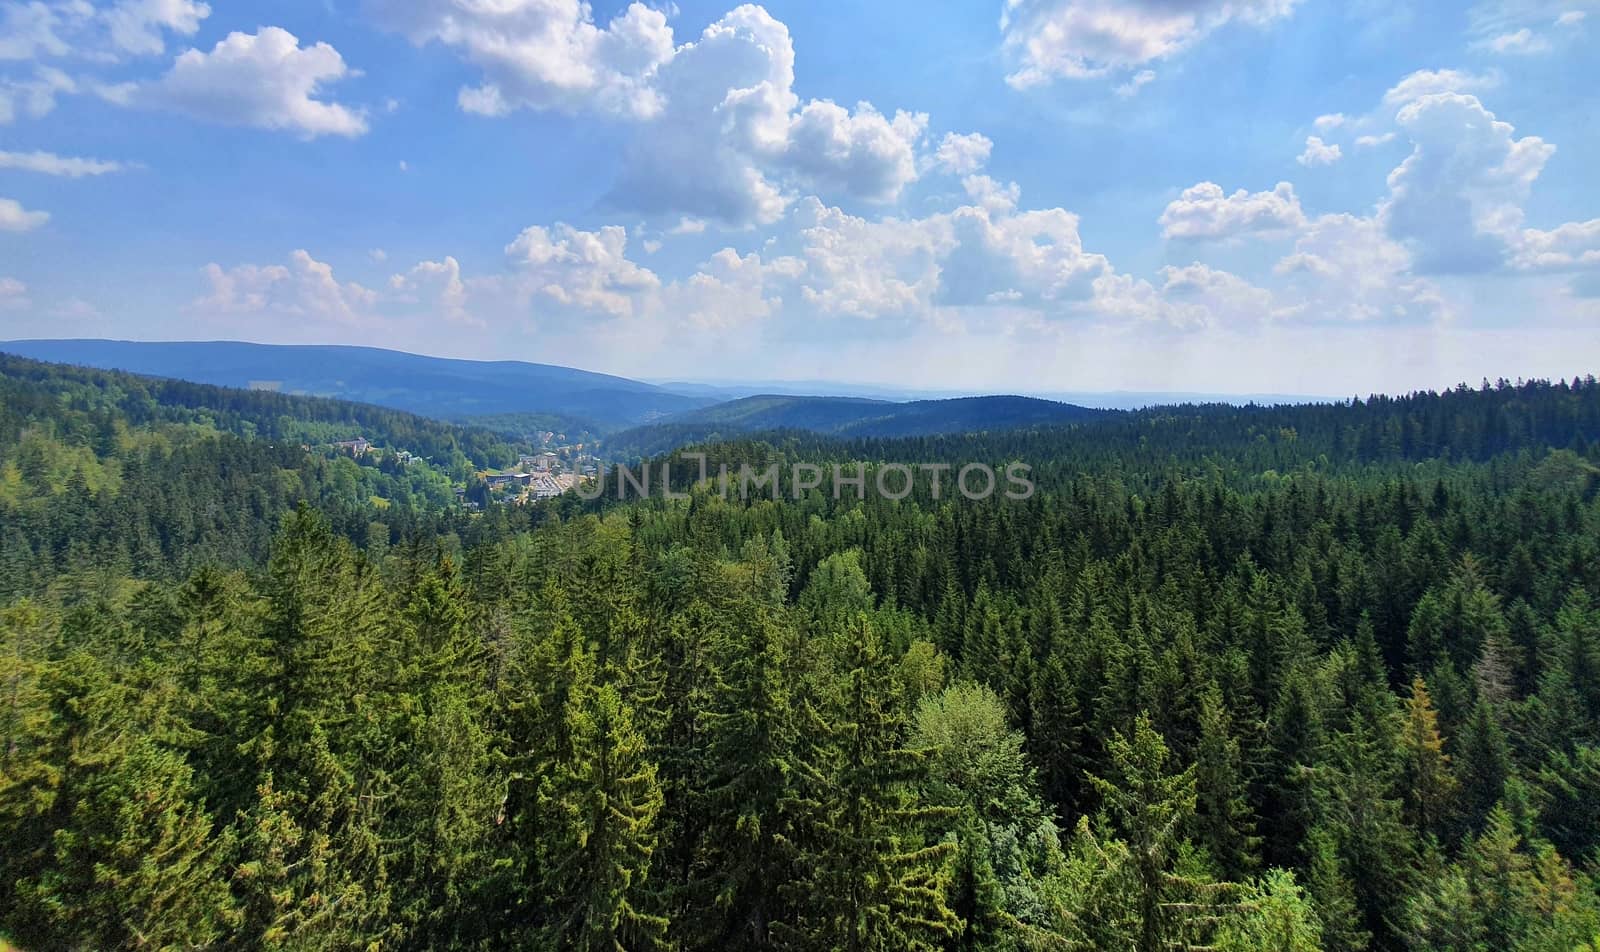 Landscape top view of the nature and forests of the Krkonose mountains (Giant Mountains) with dramatic sky.